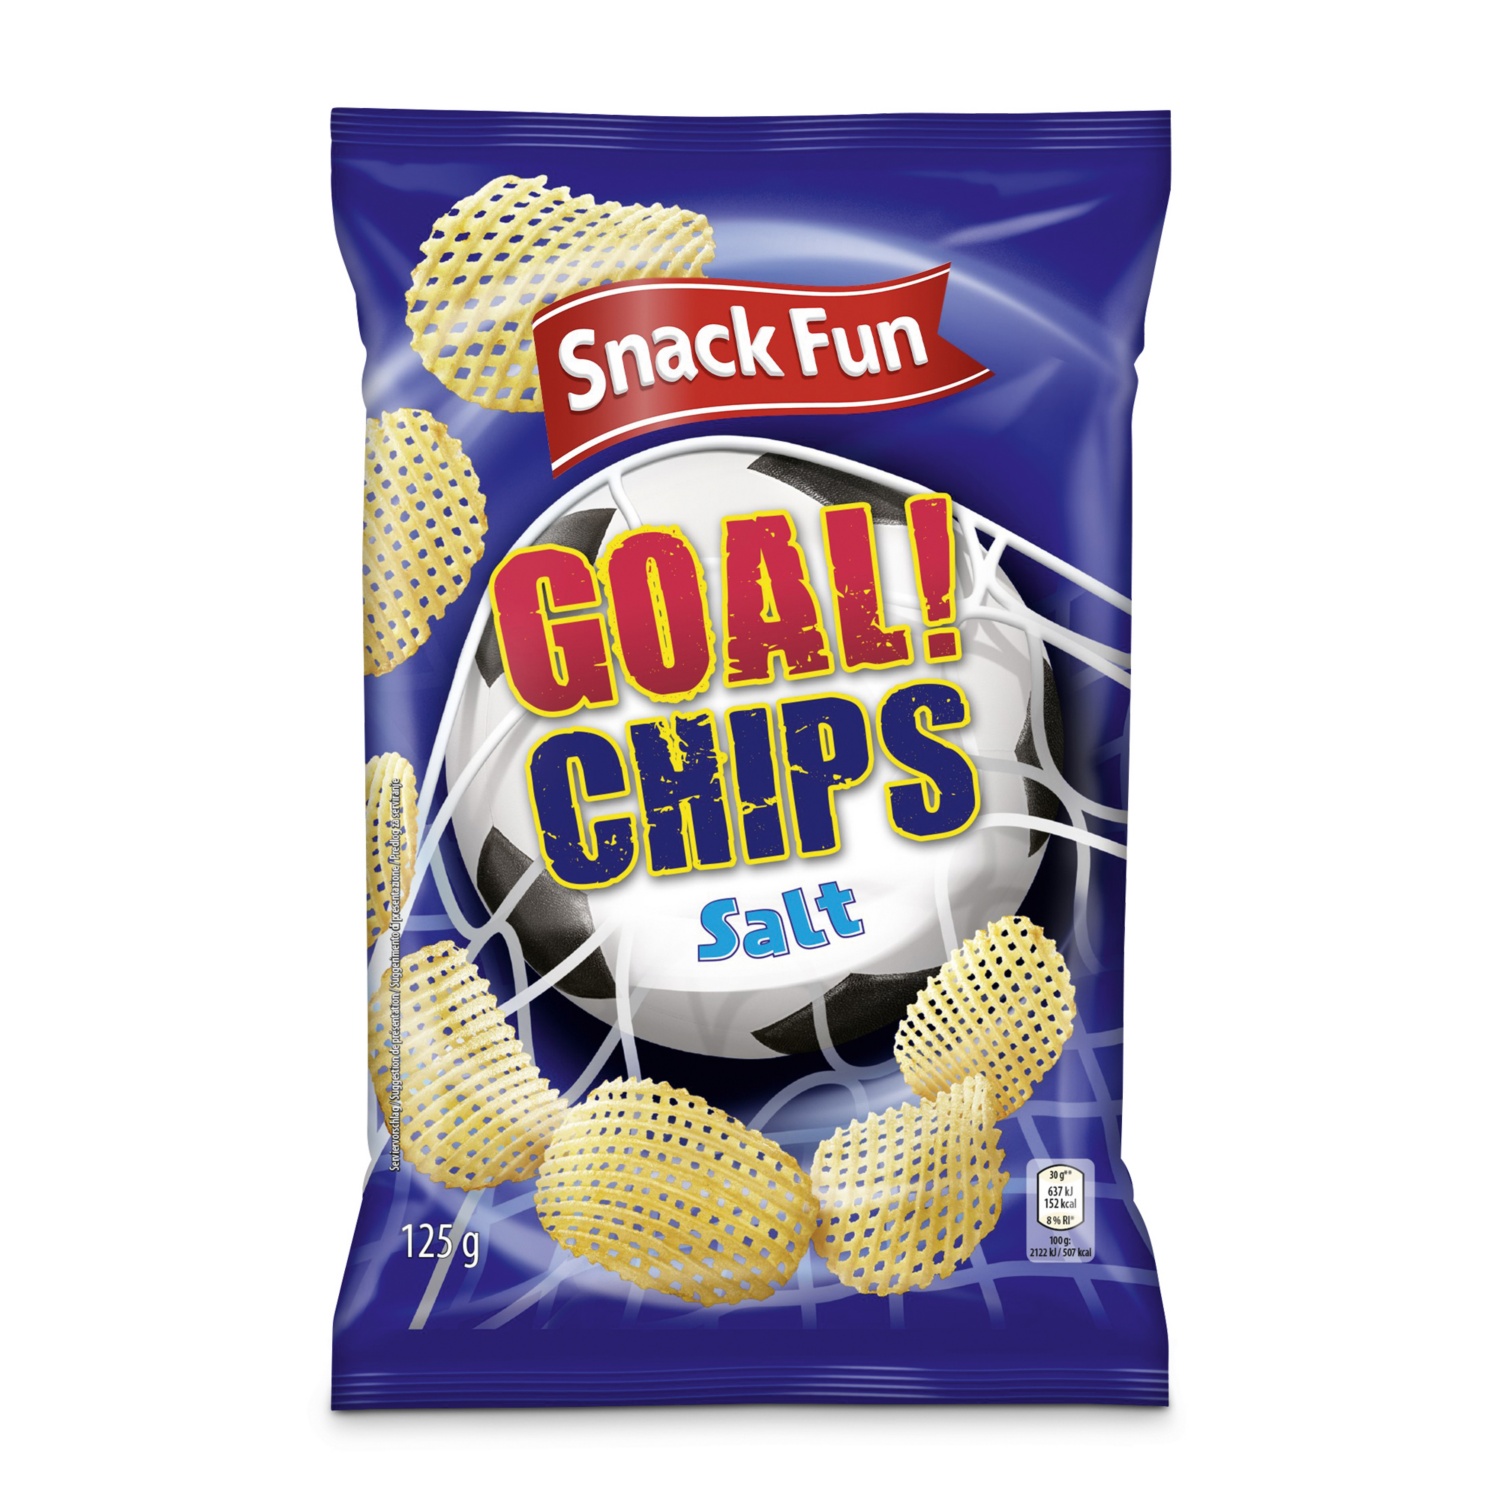 SNACK FUN Chips Goal!, sale